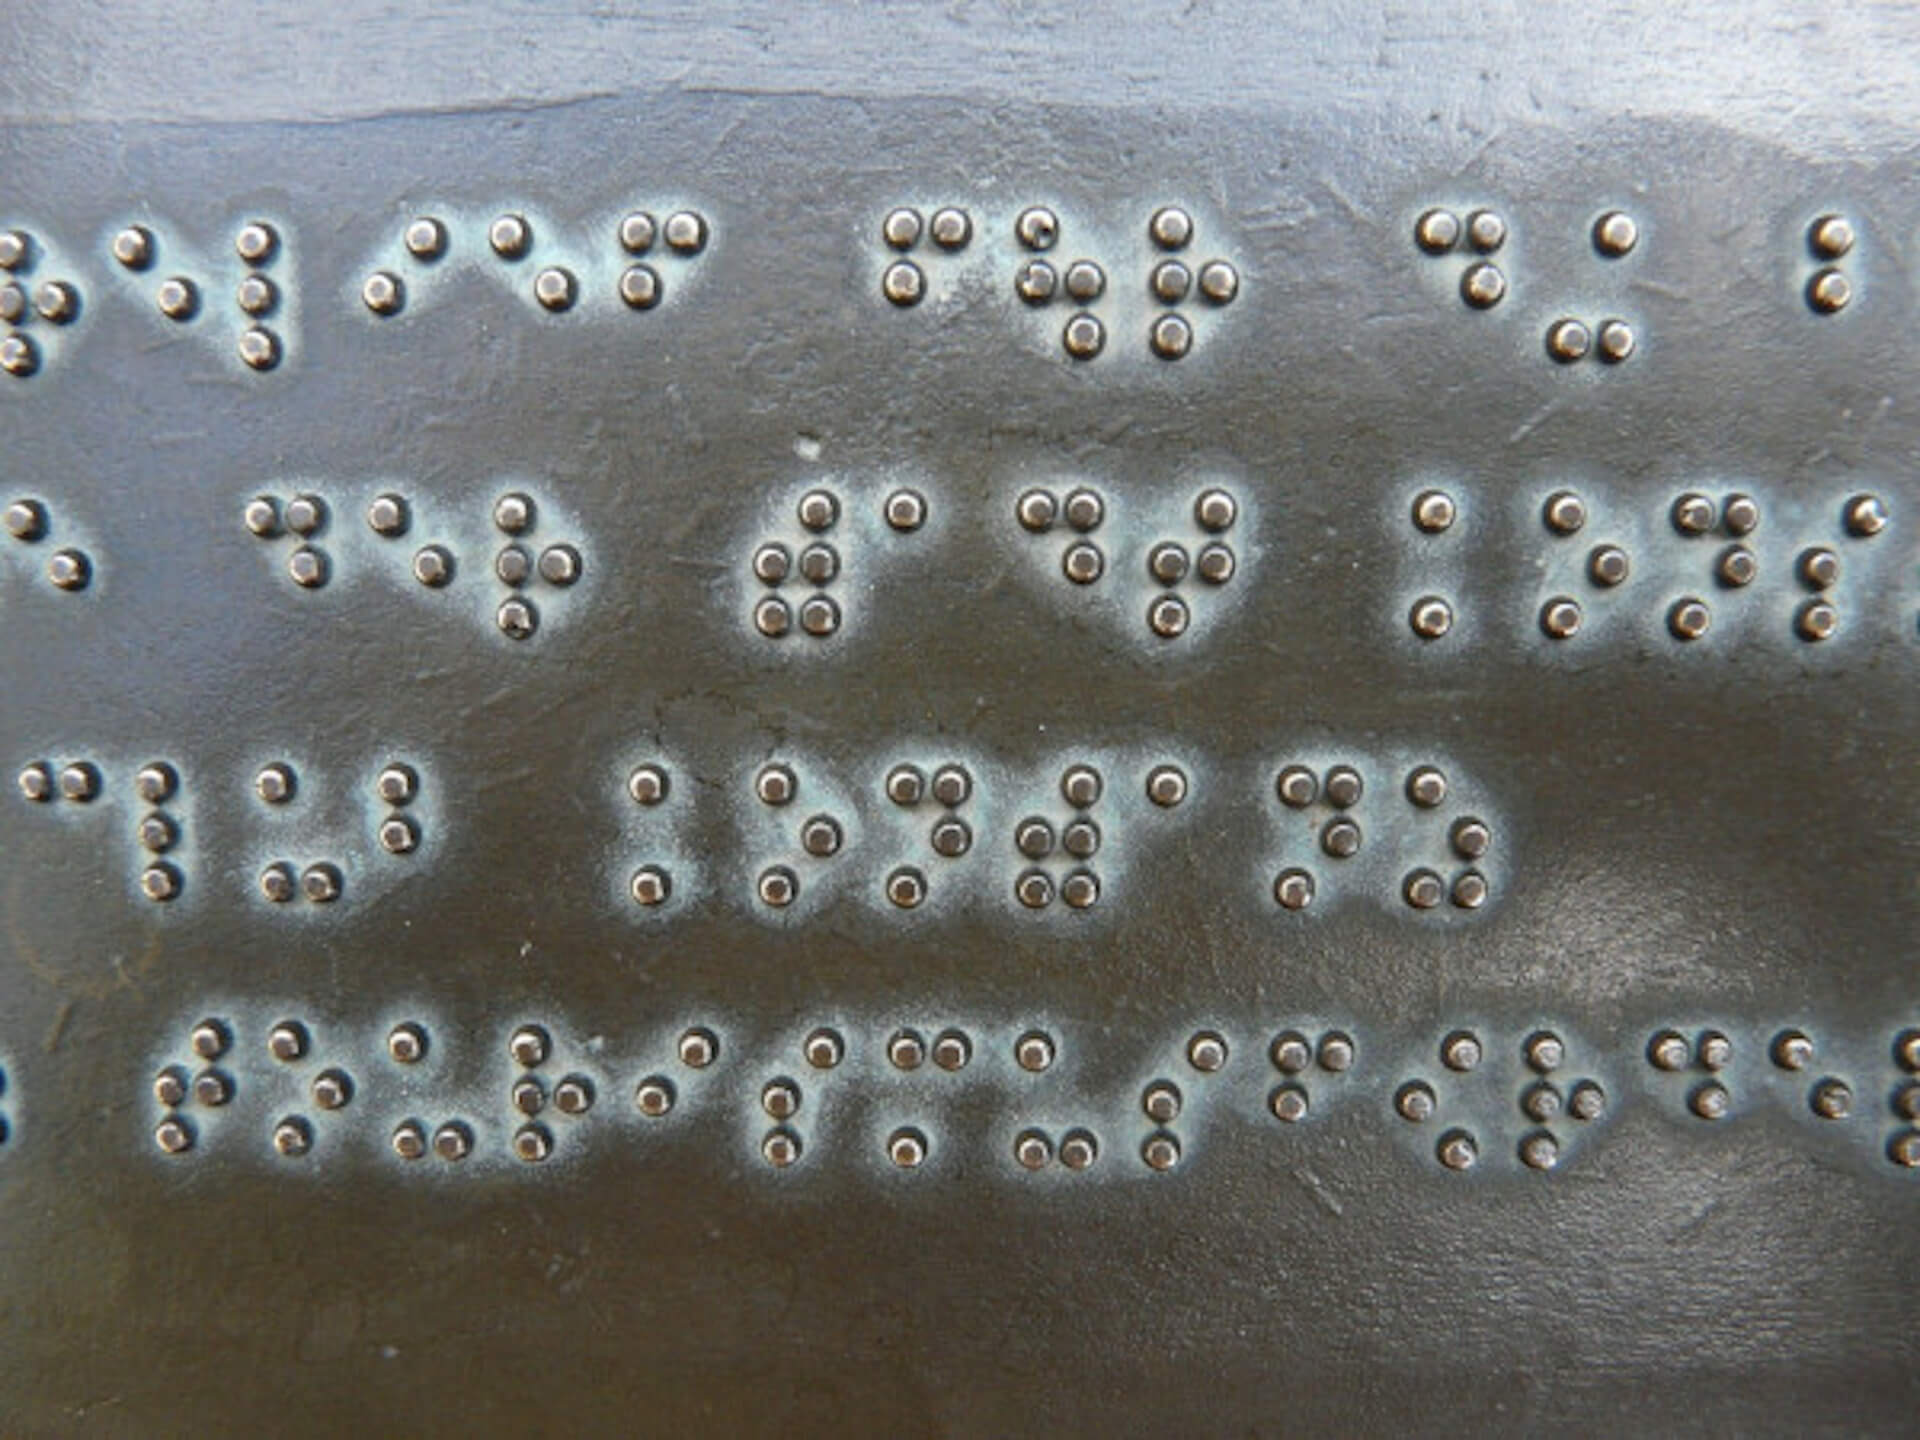 history-of-braille-everything-you-have-always-wanted-to-know